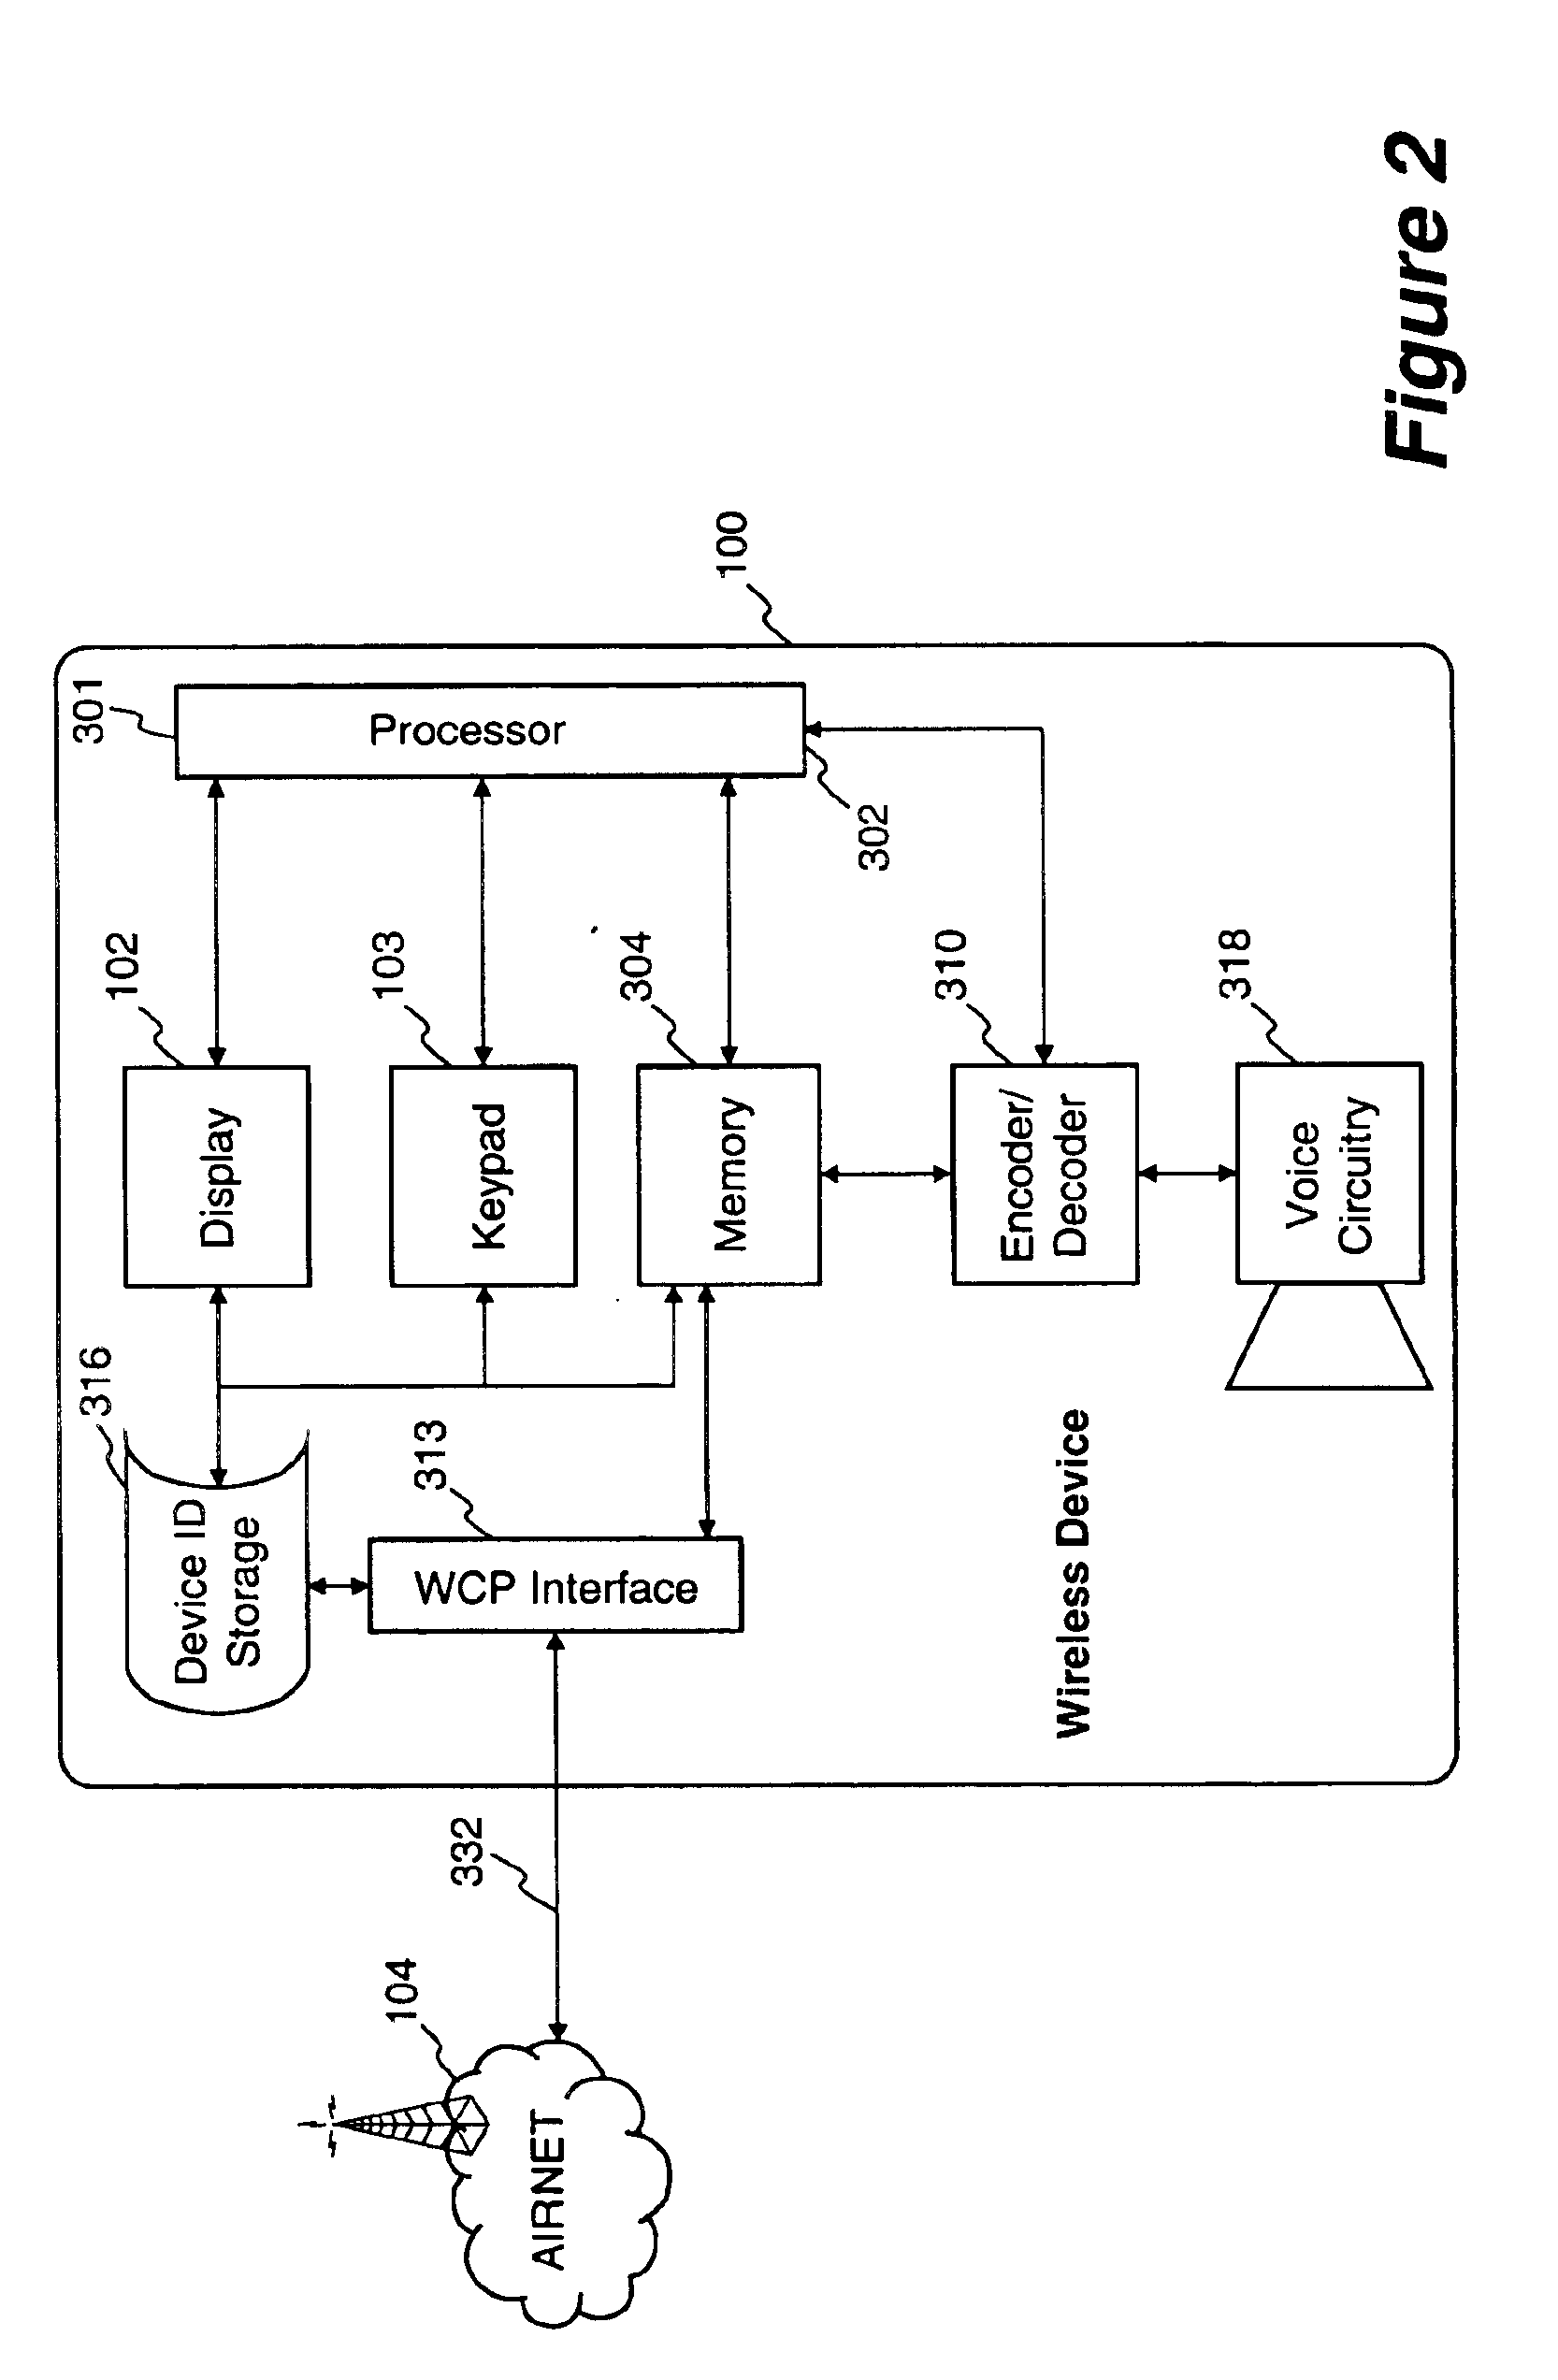 Method and apparatus for providing internet content to SMS-based wireless devices